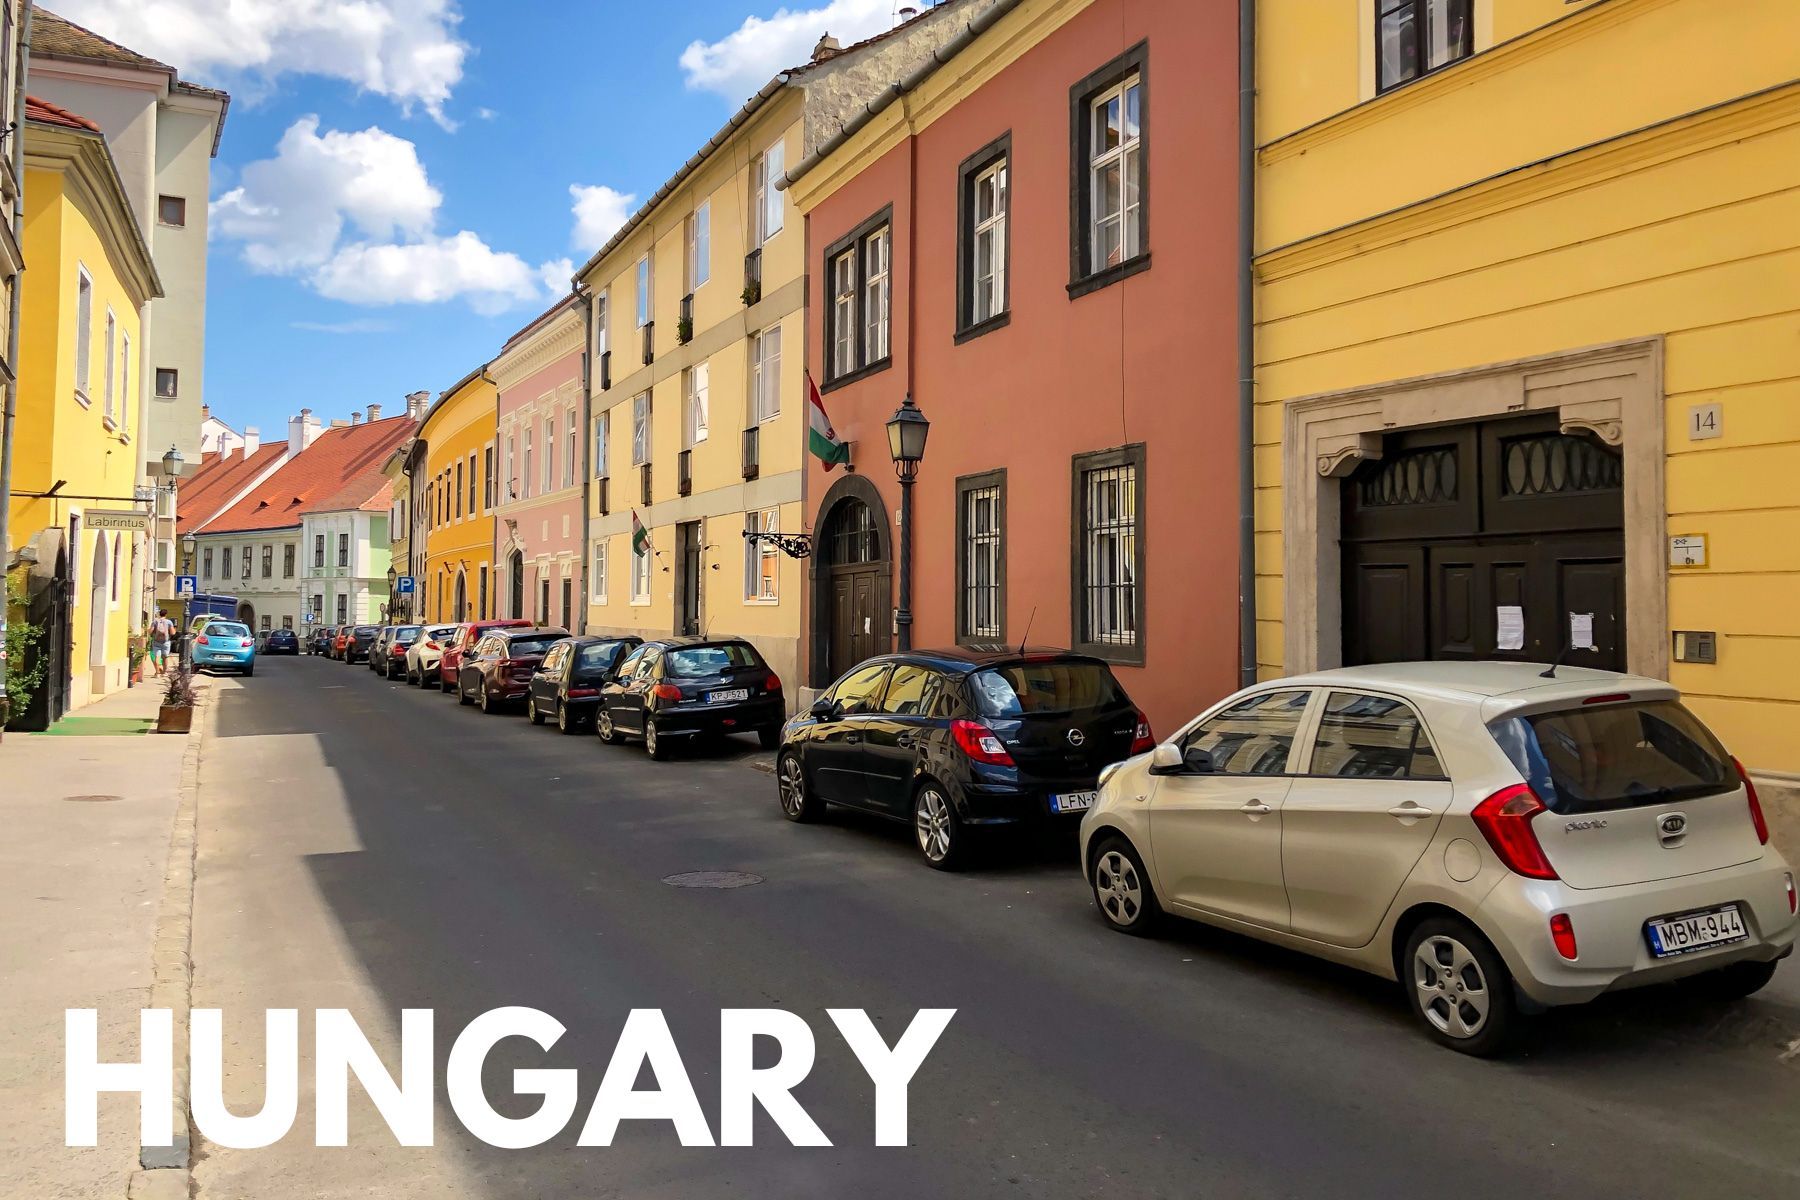 Photo of a row of colorfully painted houses with cars parked outside on a narrow street and the word Hungary overlaid